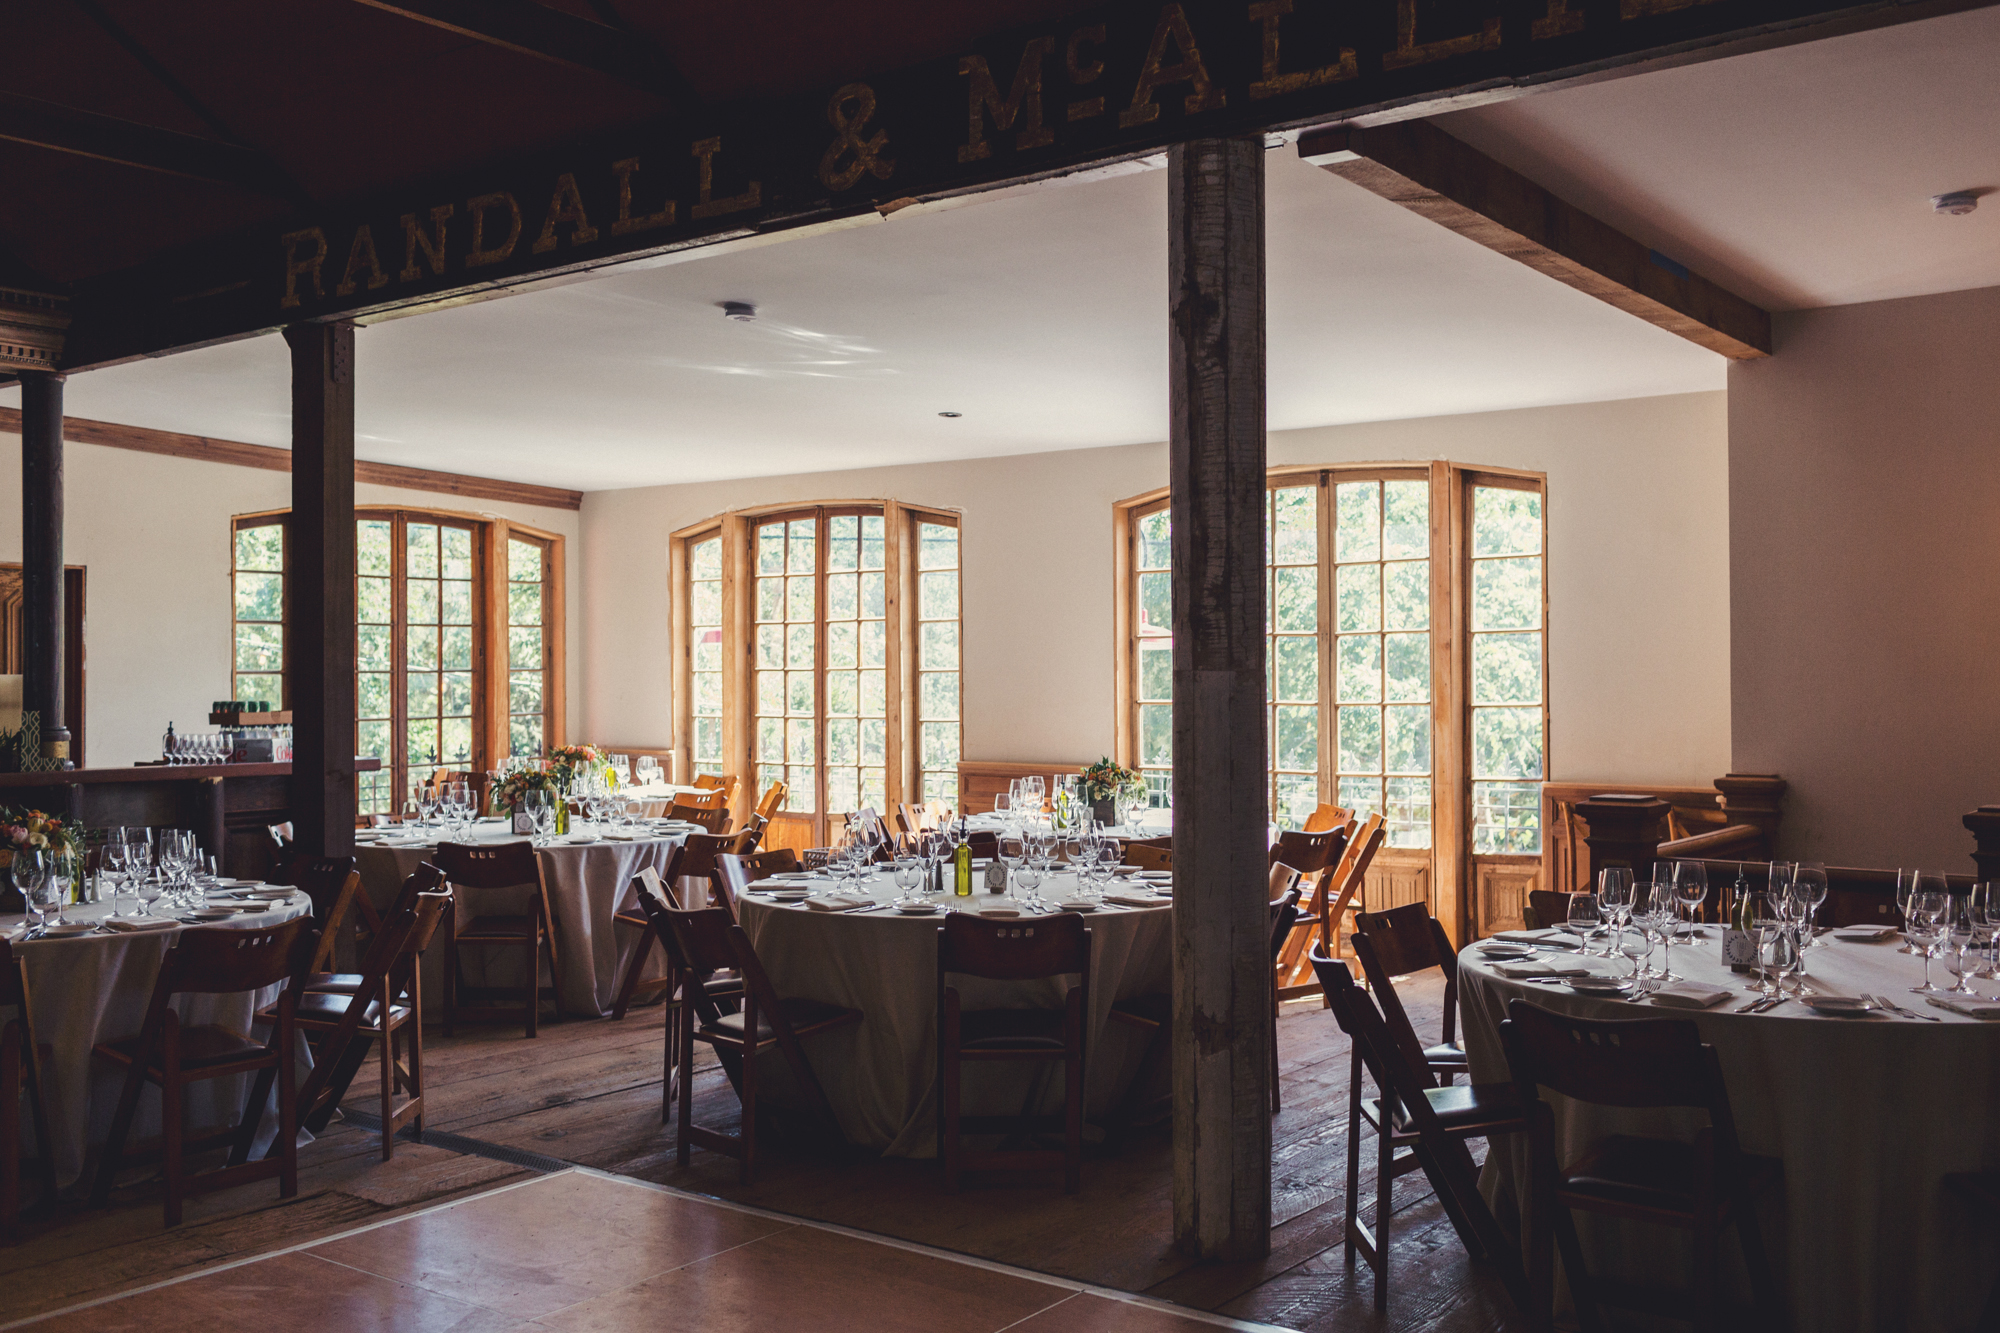 Triple S Ranch Wedding in Napa Valley @Anne-Claire Brun 0091